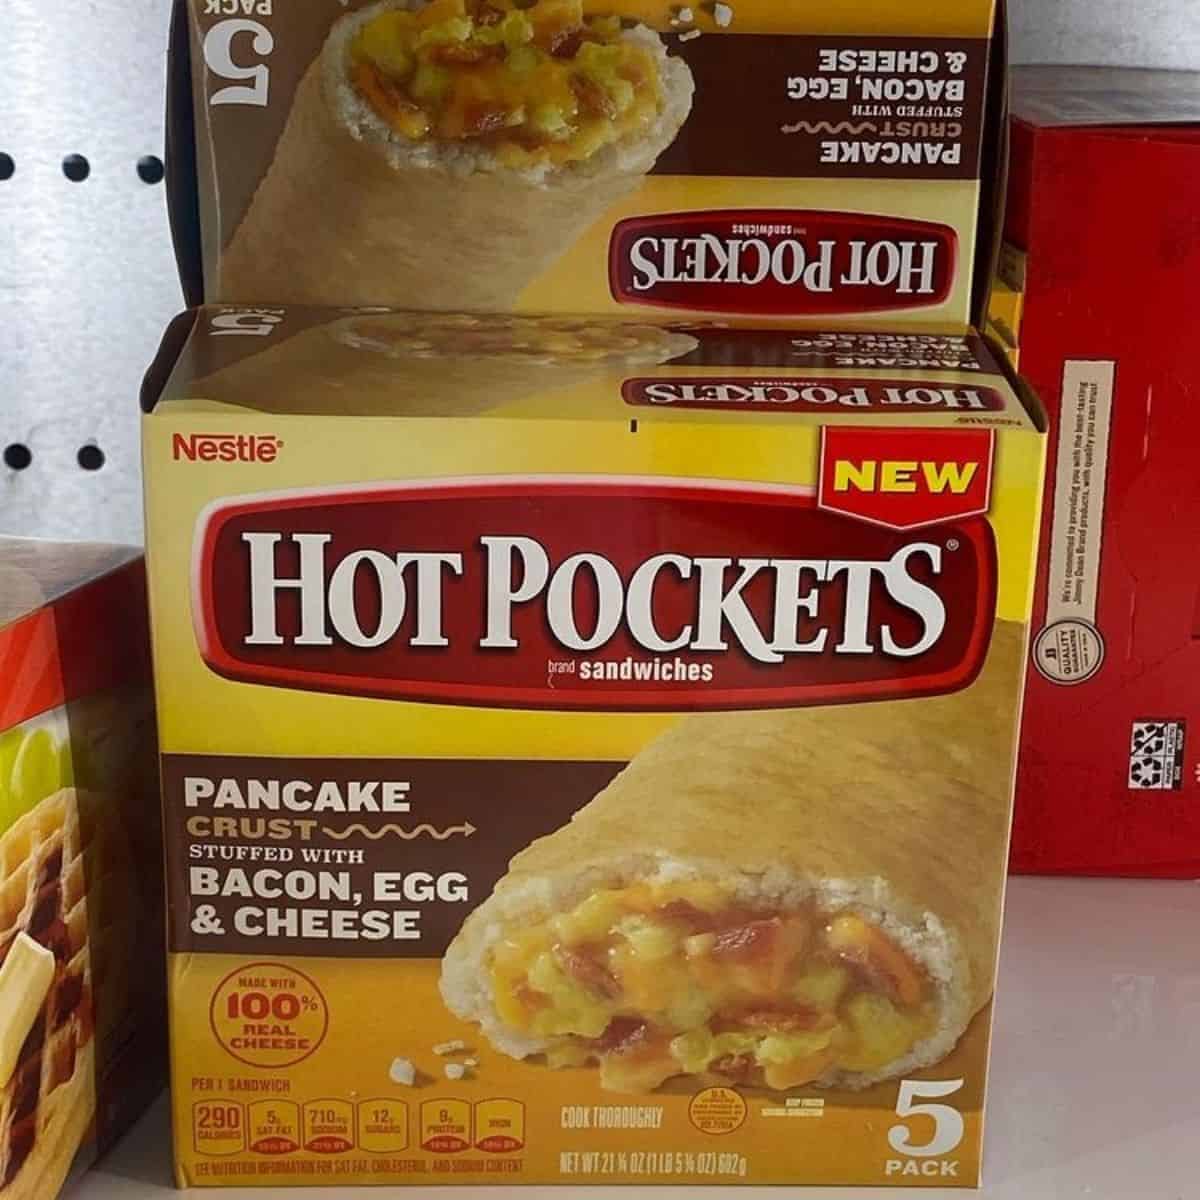 Bacon, egg and cheese filling hot pocket